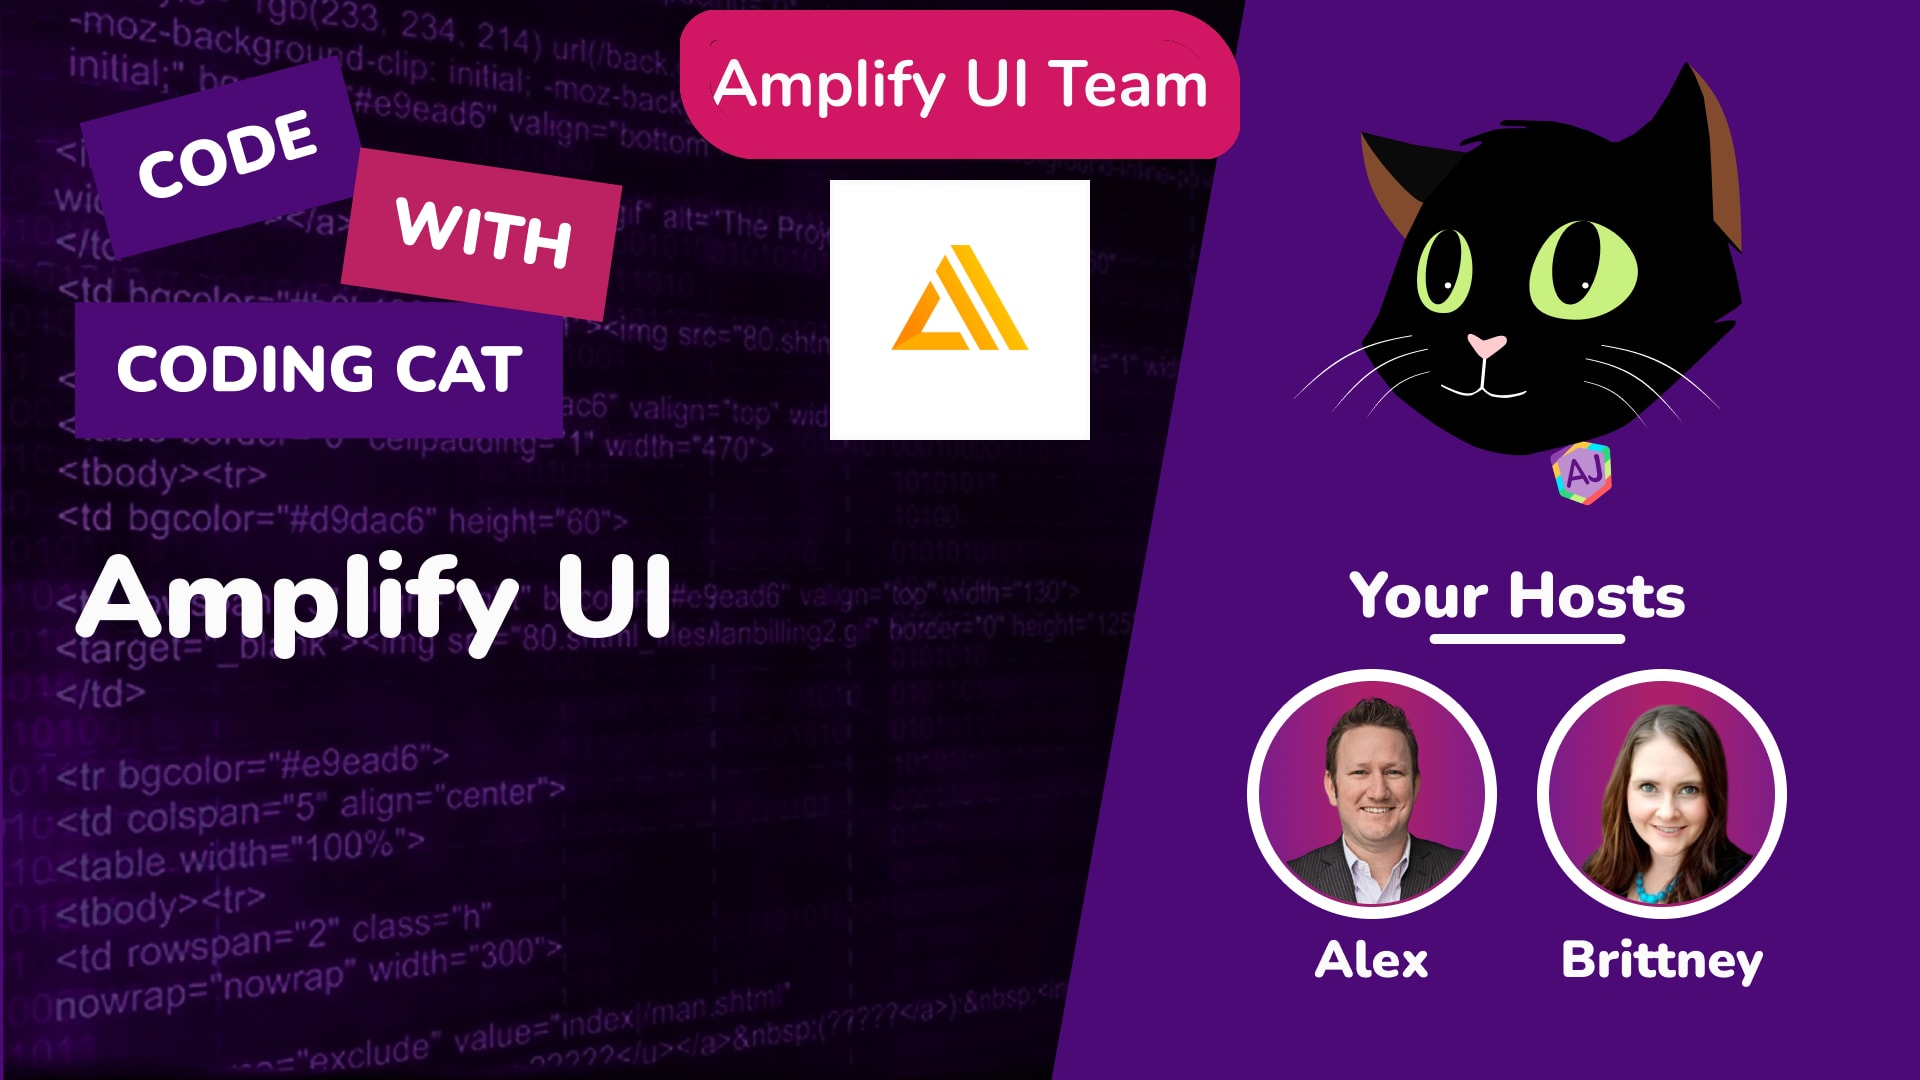 Live Coding with the Amplify UI team